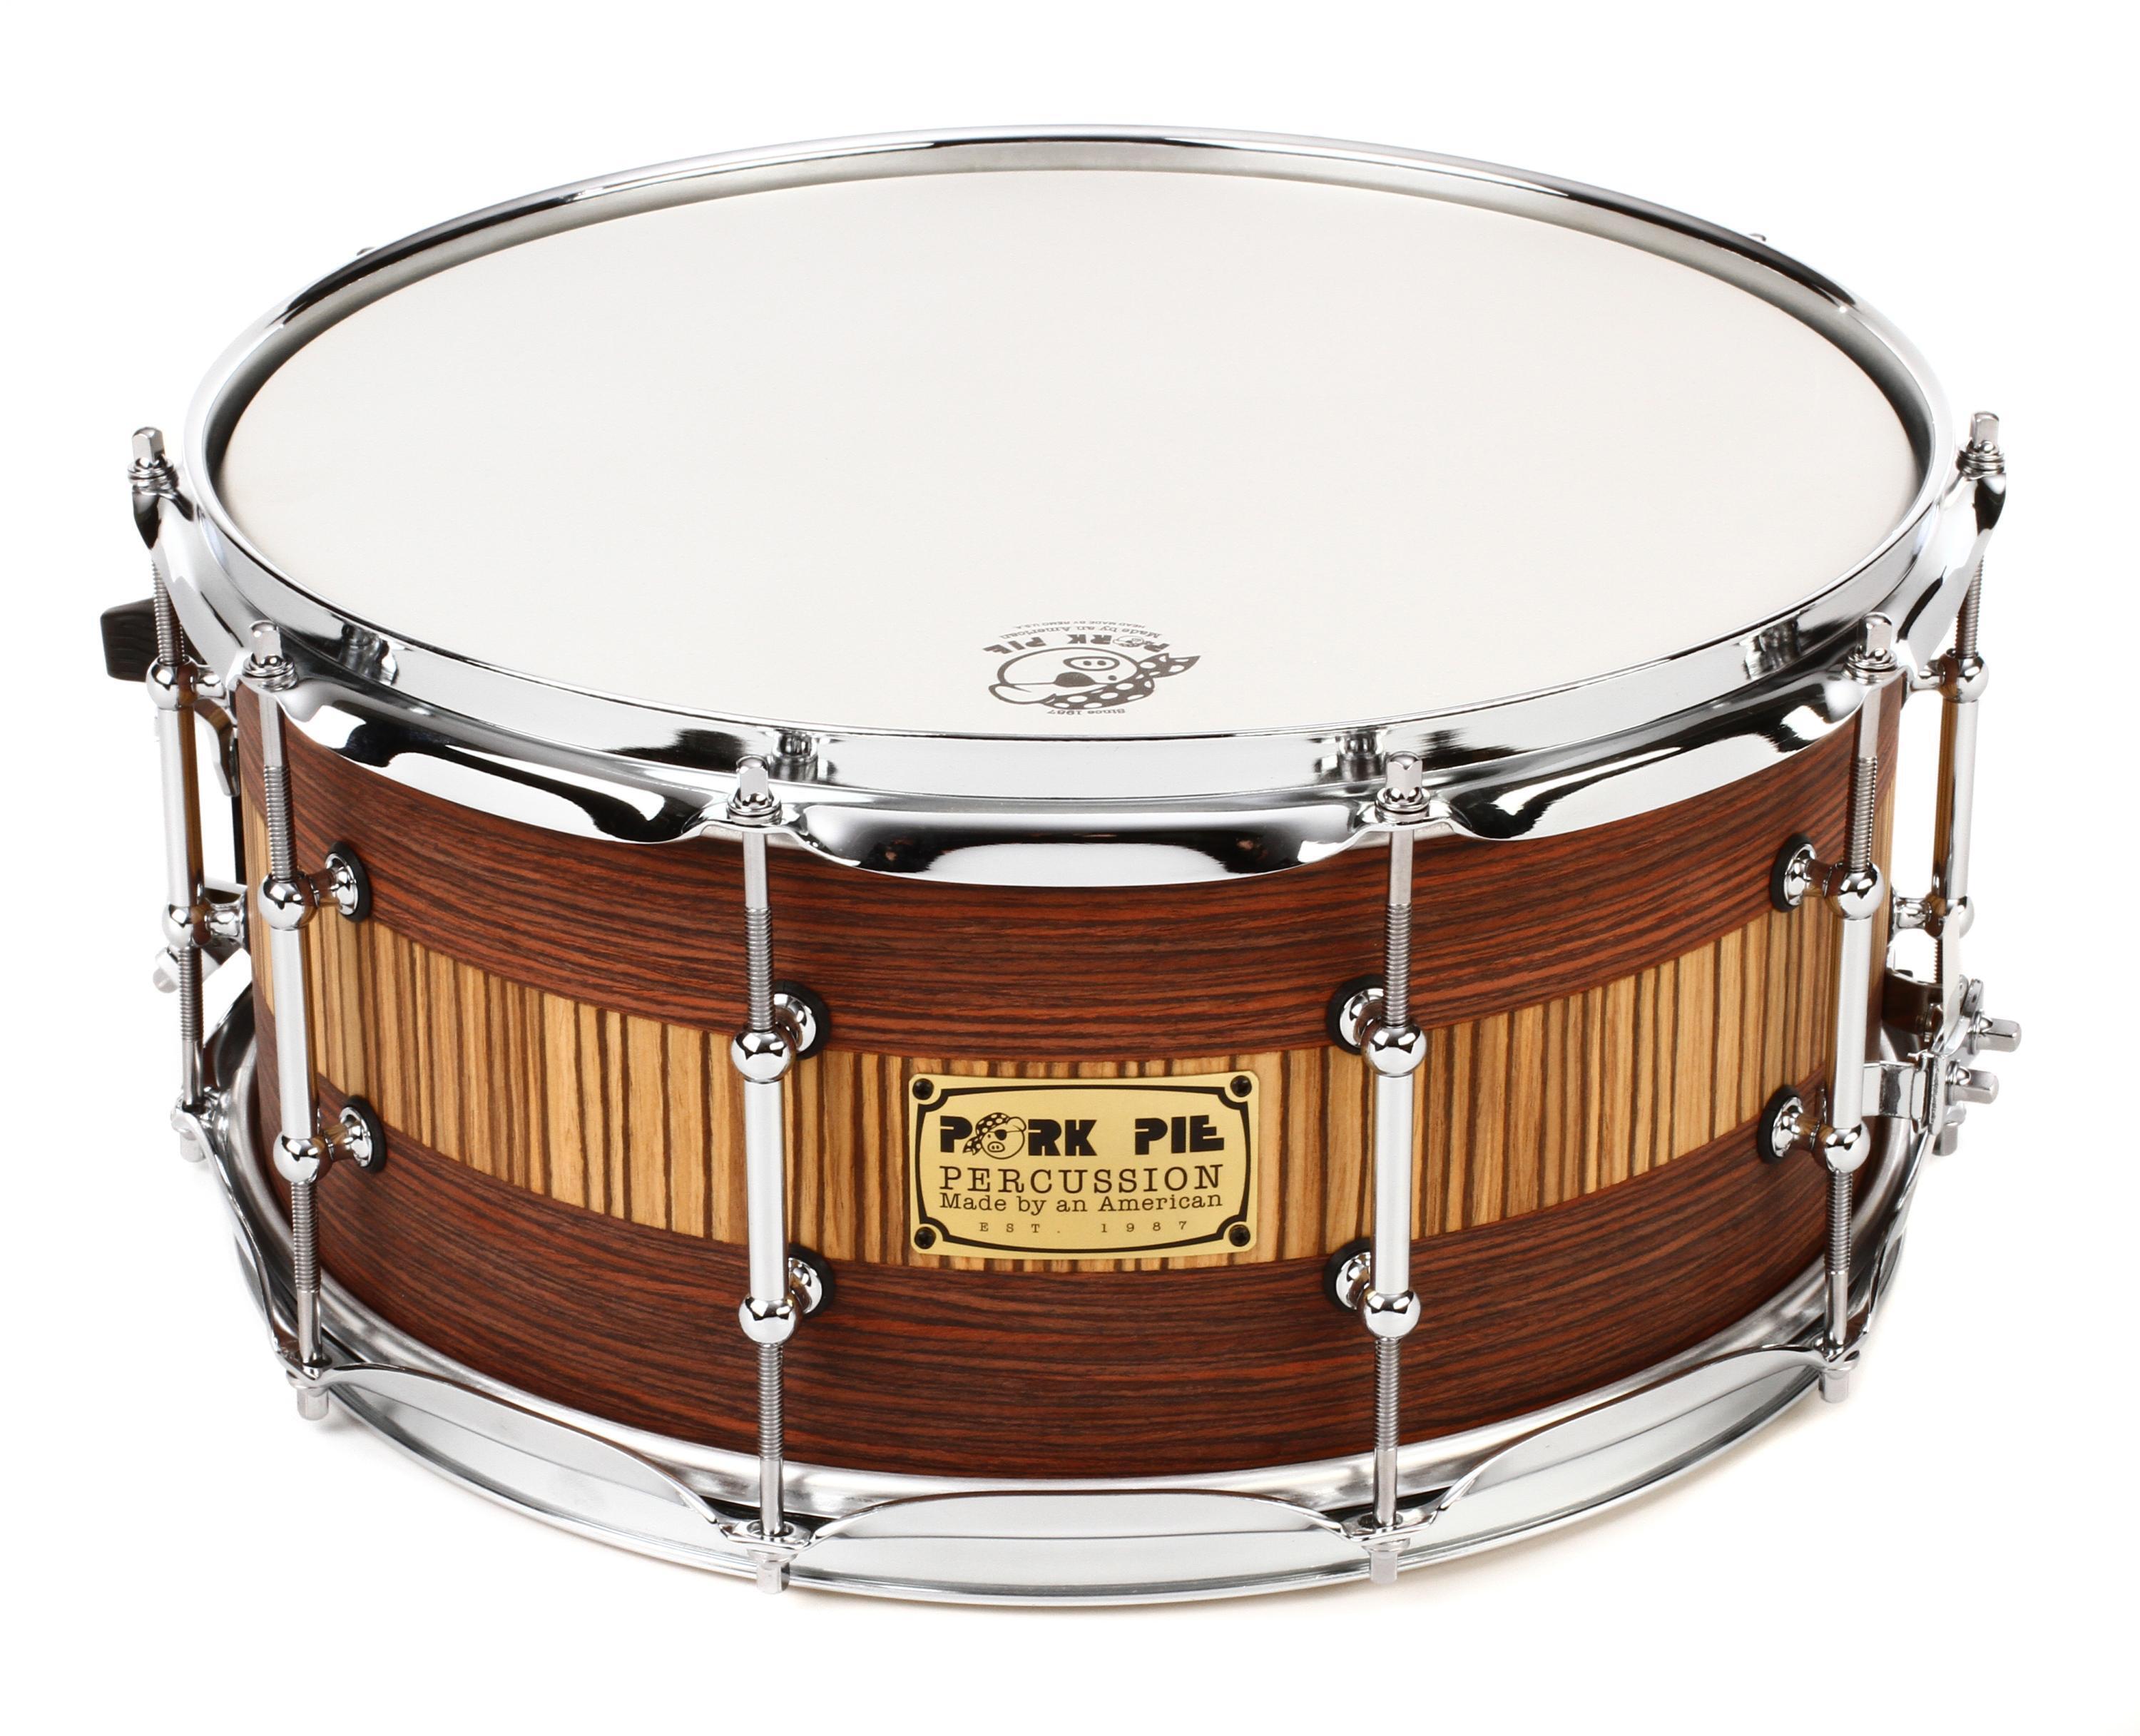 Pork Pie Percussion USA Maple 6.5 x 14-inch Snare Drum - Rosewood-Zebrawood  veneer